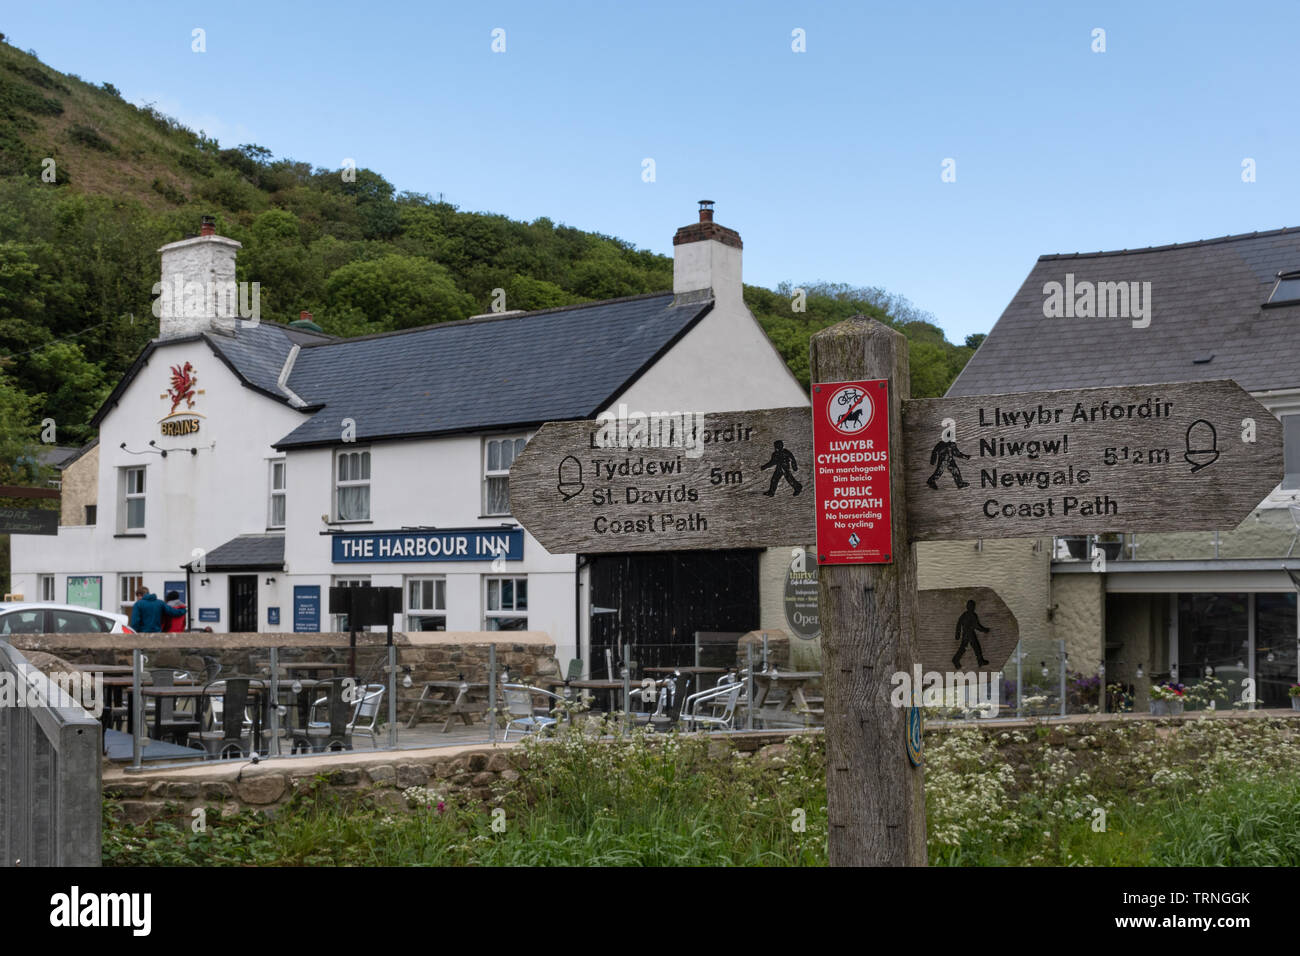 The Harbour Inn and a Pembrokeshire coast path signpost in Solva, Pembrokeshire, Wales, UK Stock Photo